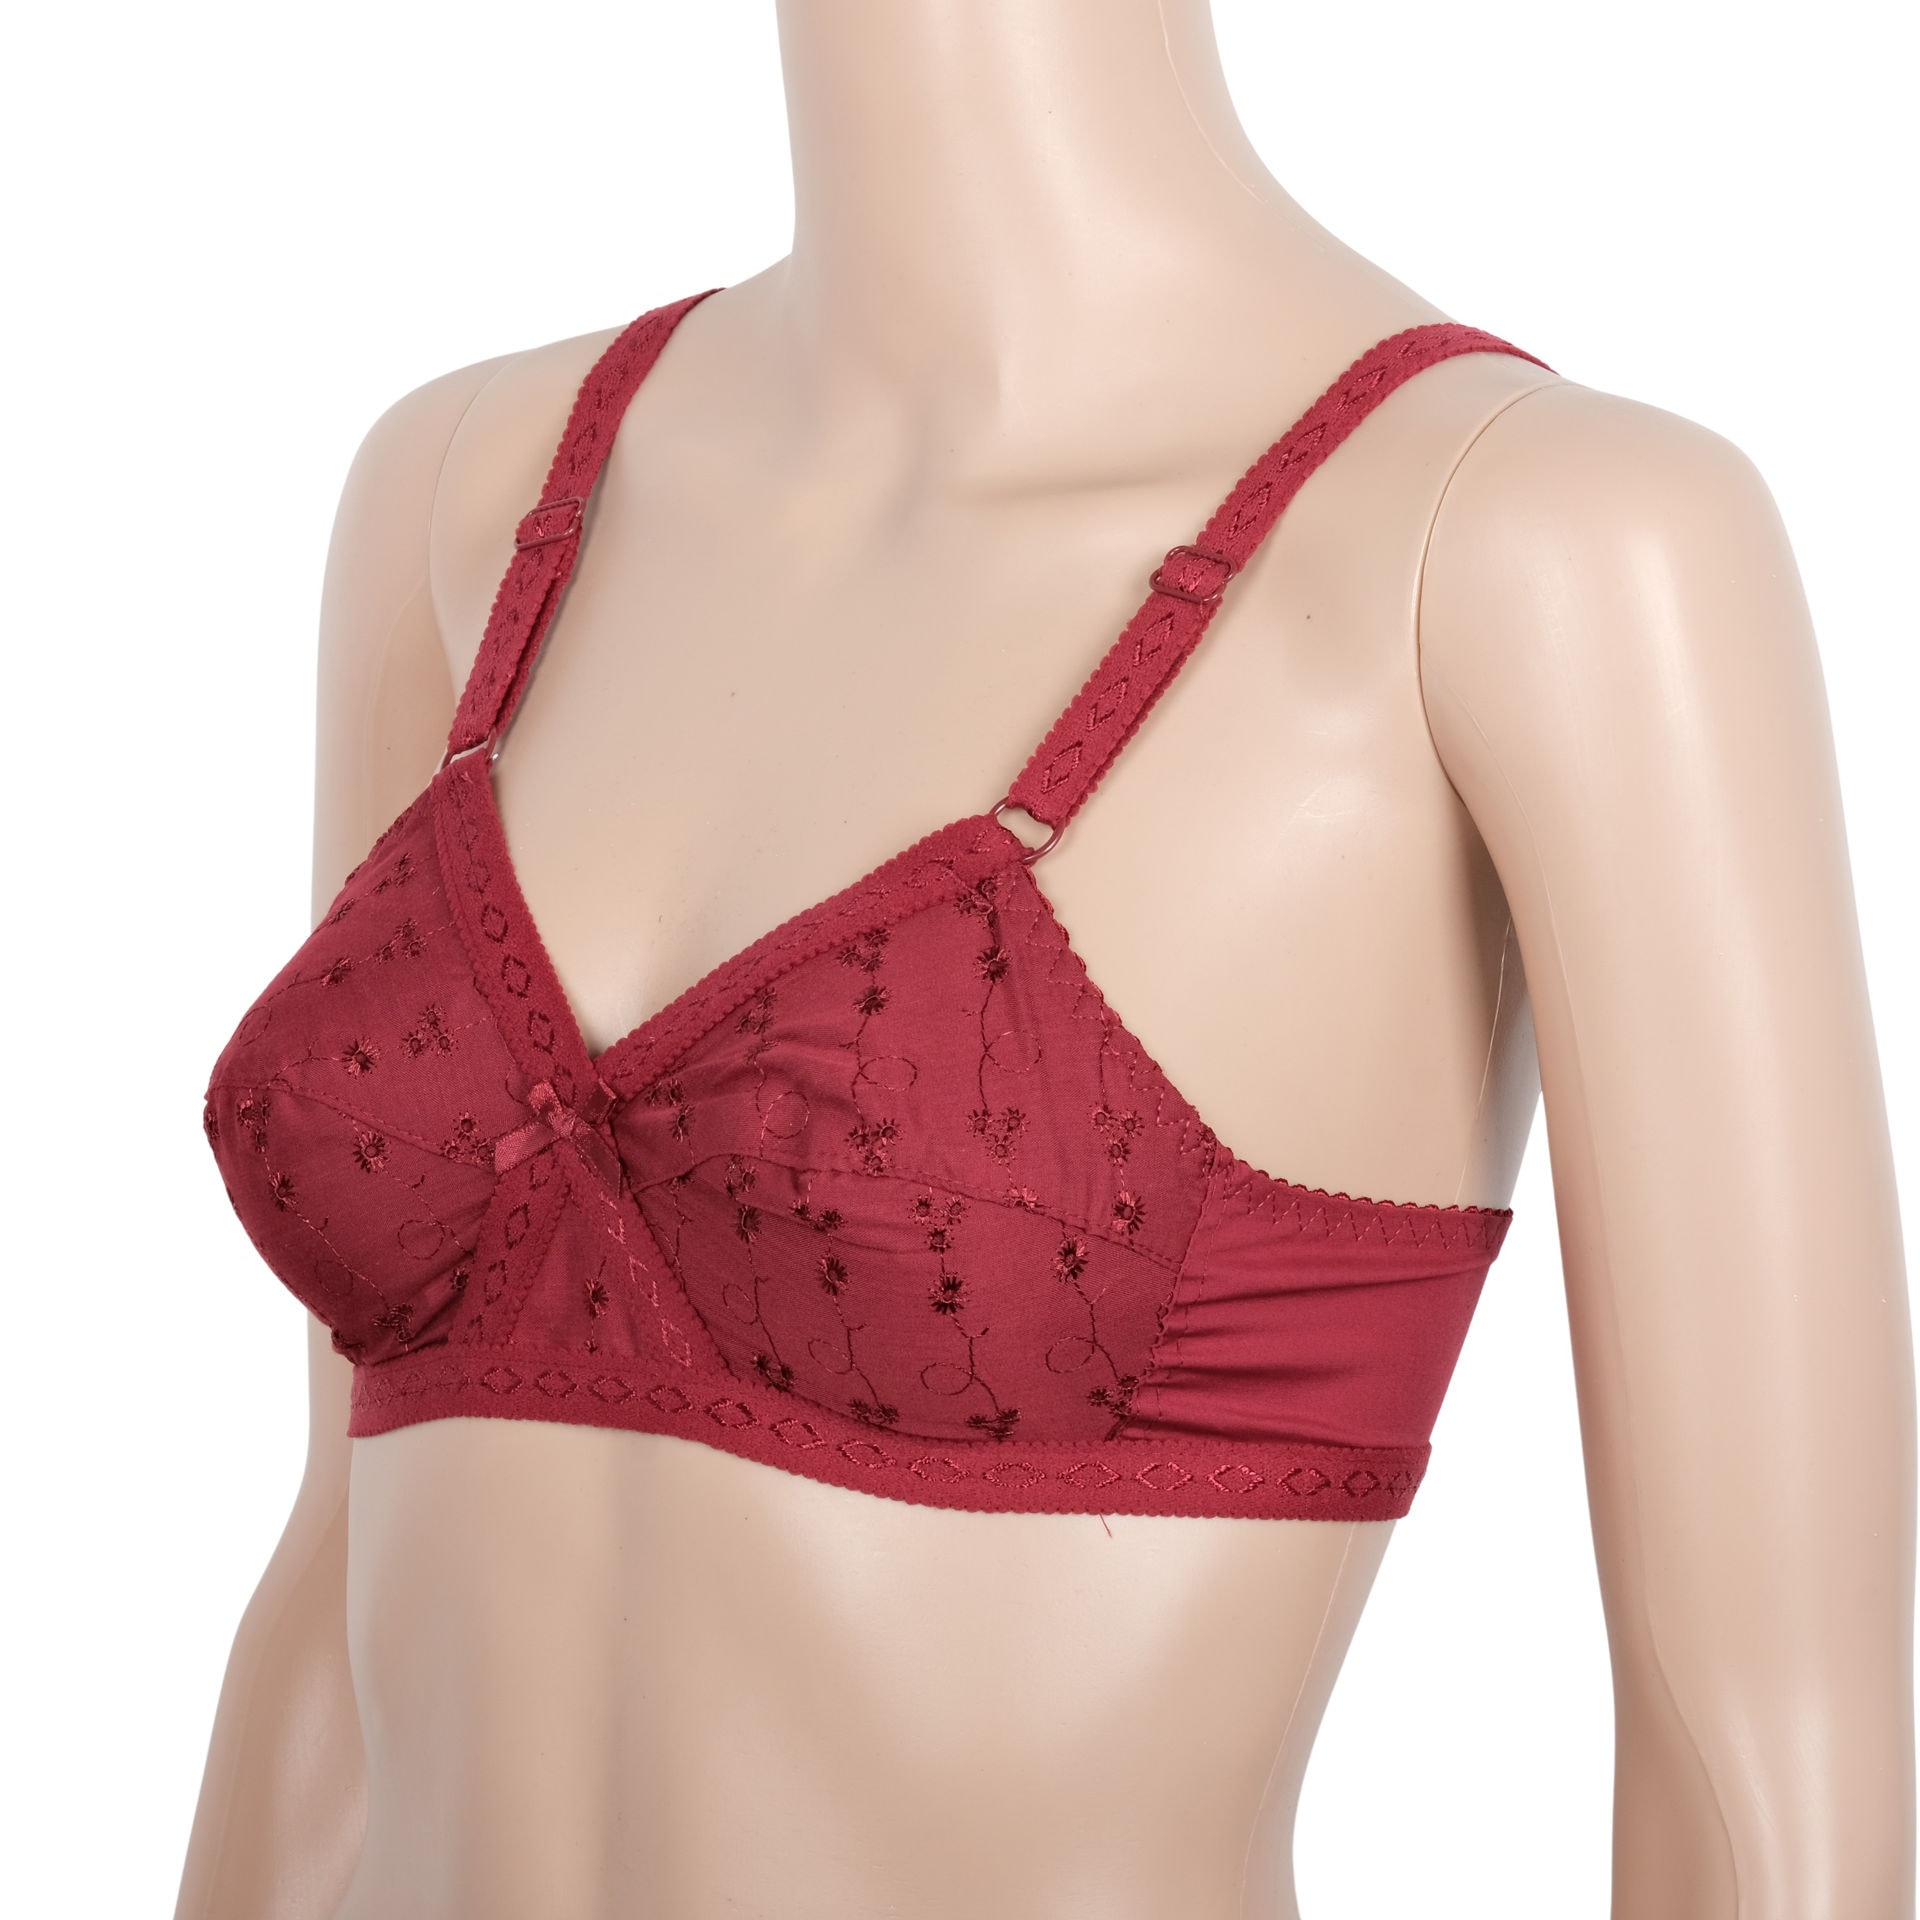 https://assets.dragonmart.ae//pictures/0538690_dhabeena-womens-lace-design-bra-maroon.jpeg